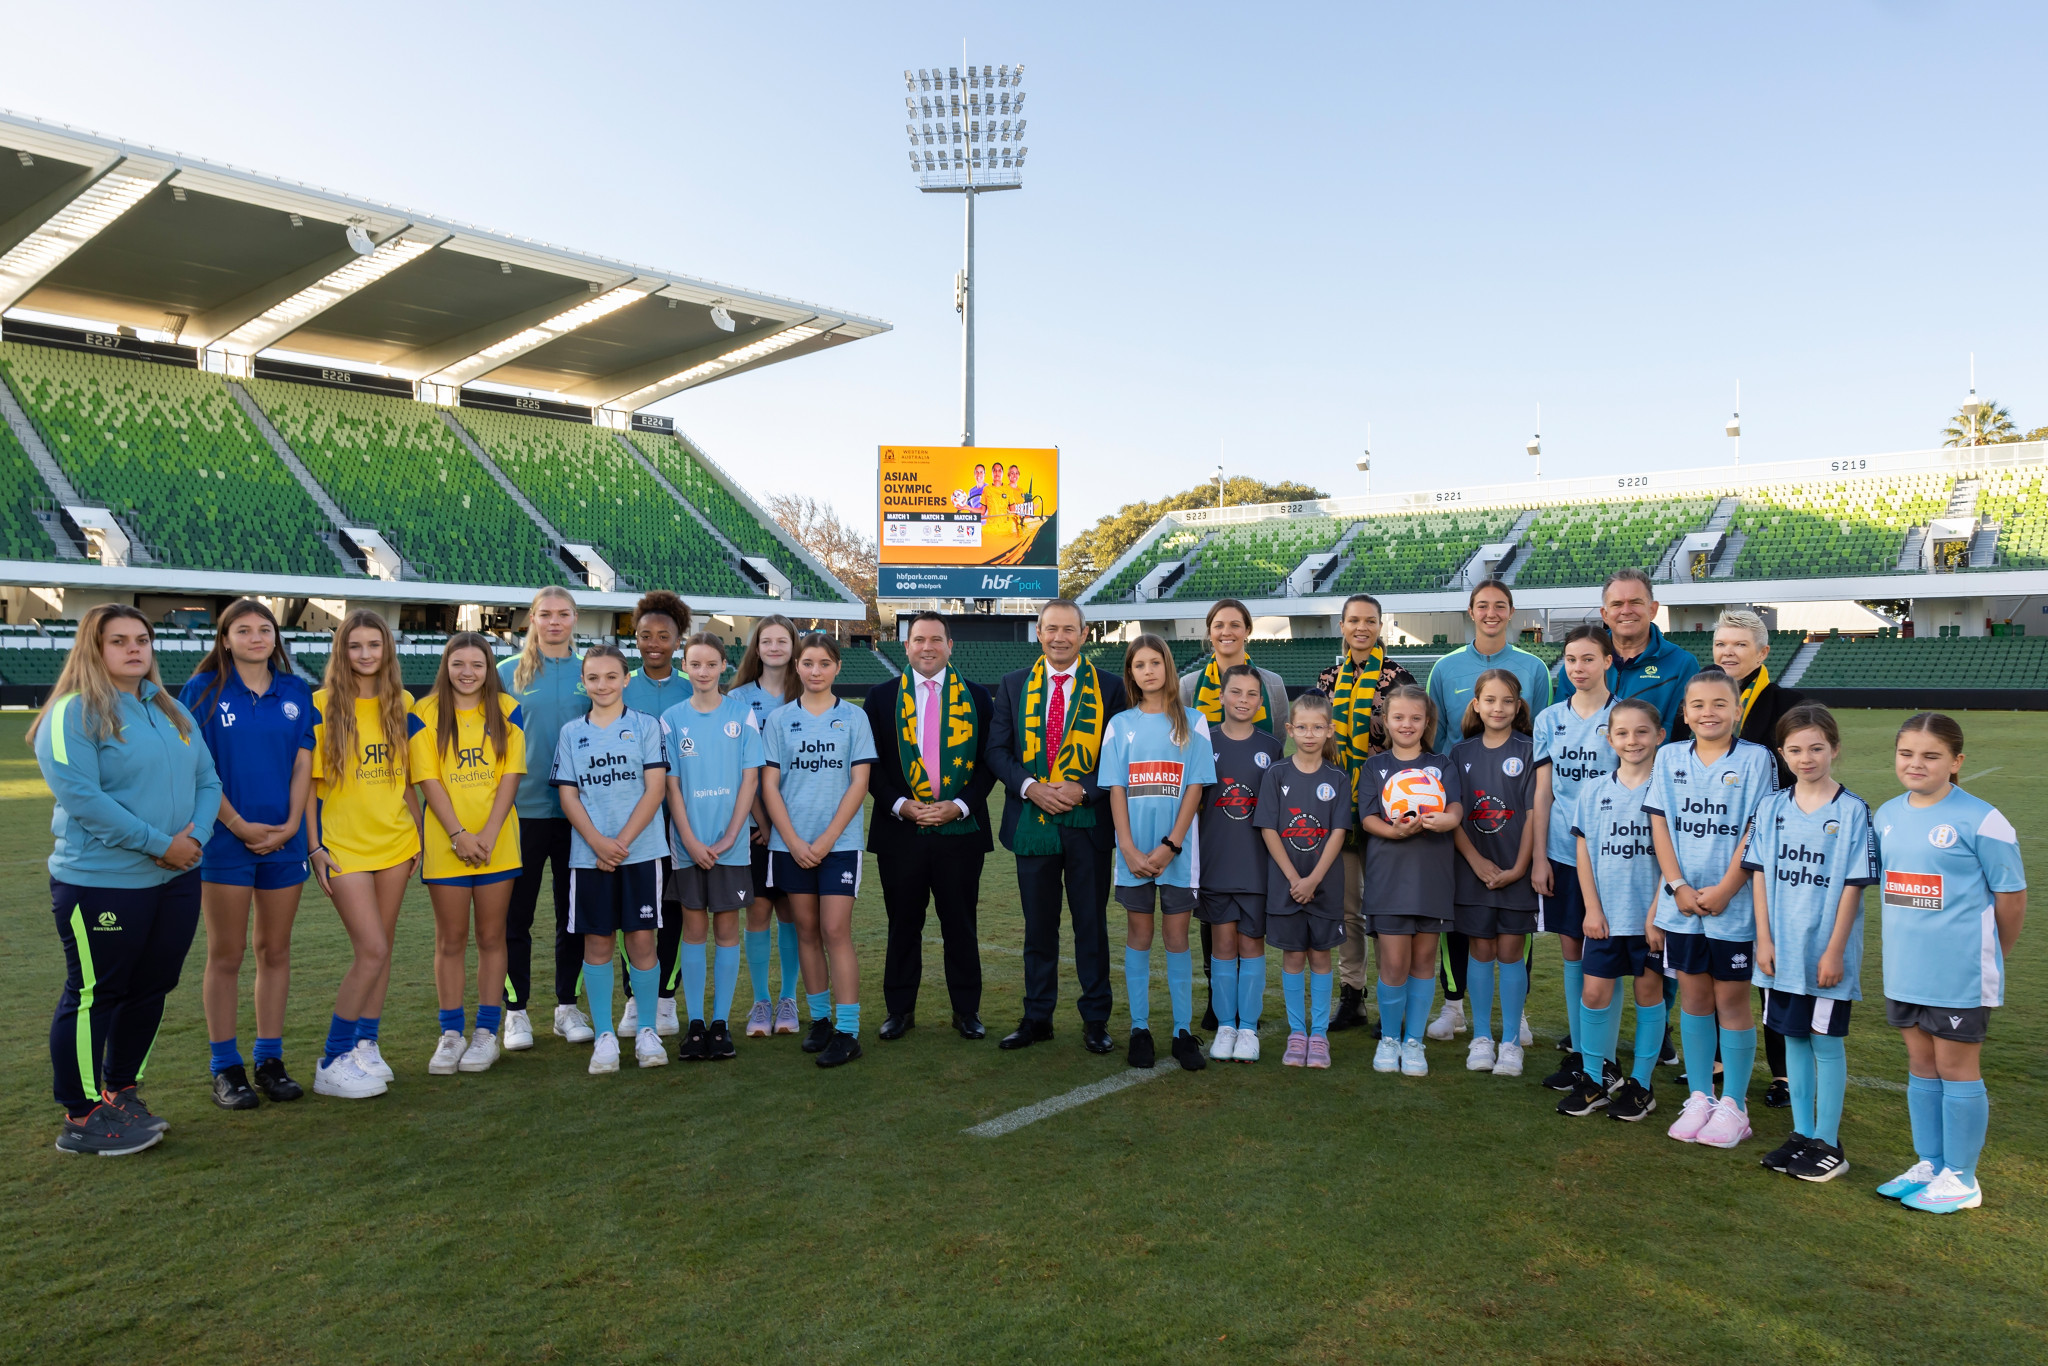 Perth set to stage Paris 2024 women's football qualifying matches